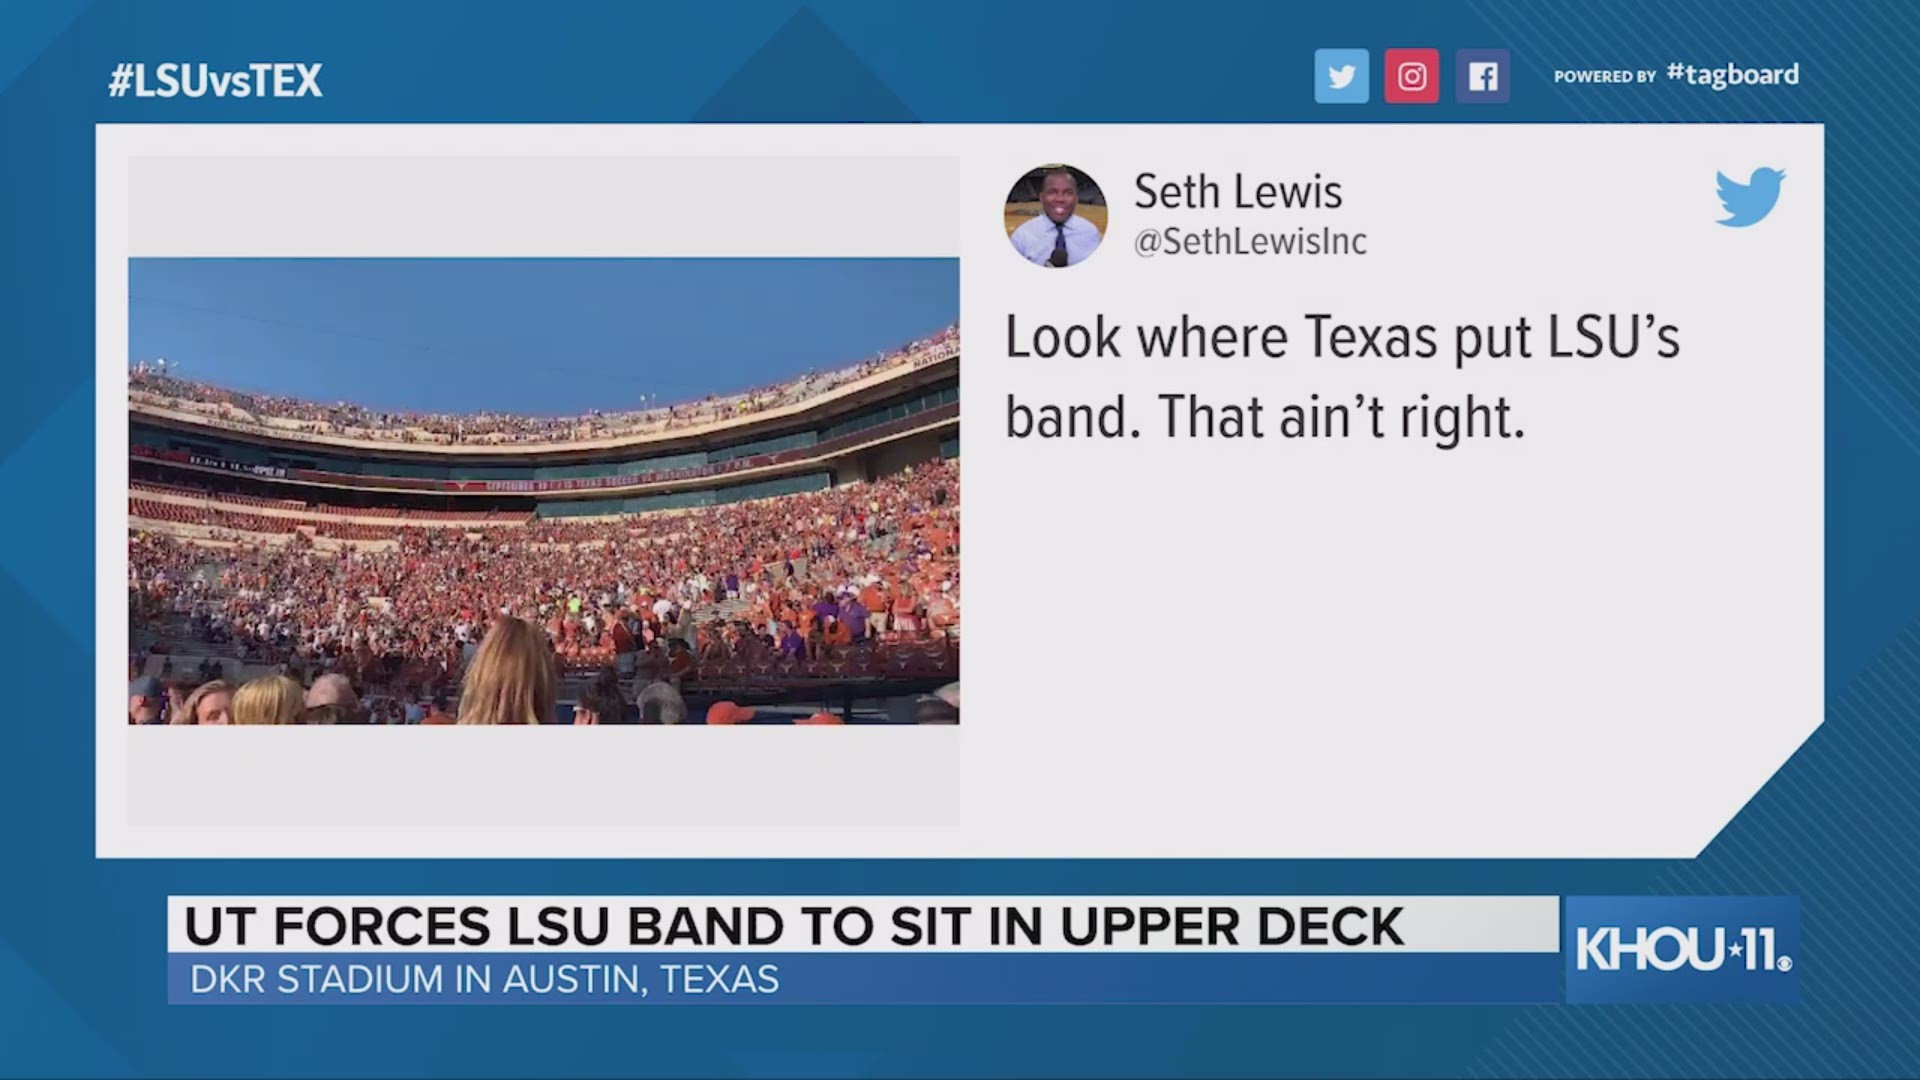 The Texas Longhorns lost to the LSU Tigers on Saturday in one of the most anticipated faceoffs of the college football season. But LSU fans soon found out they were in enemy territory at DKR Stadium, with many of the best seats reserved for Longhorn fans.